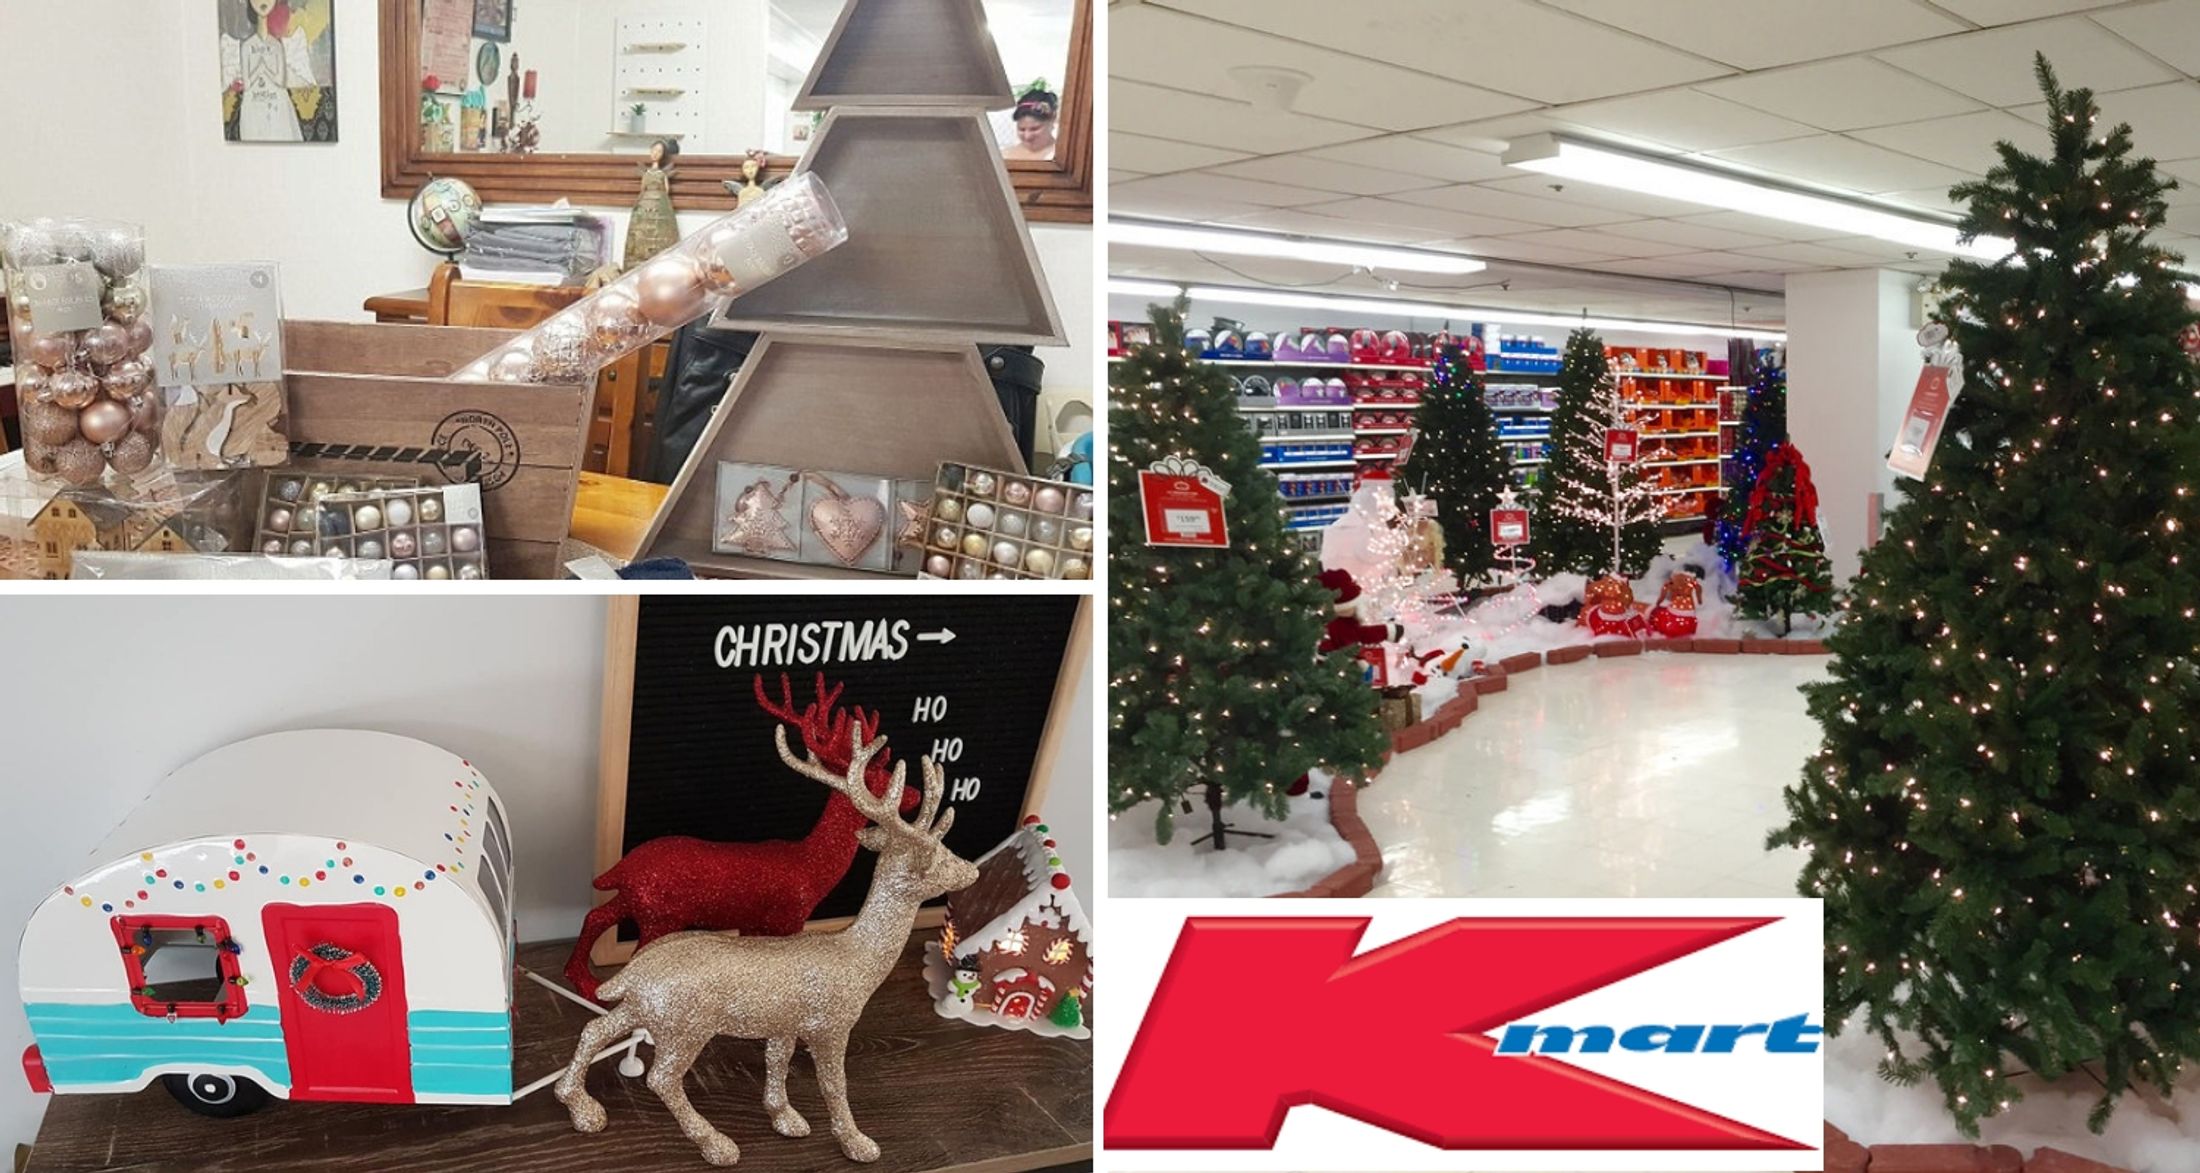 Kmart Christmas Decorations - Photos All Recommendation